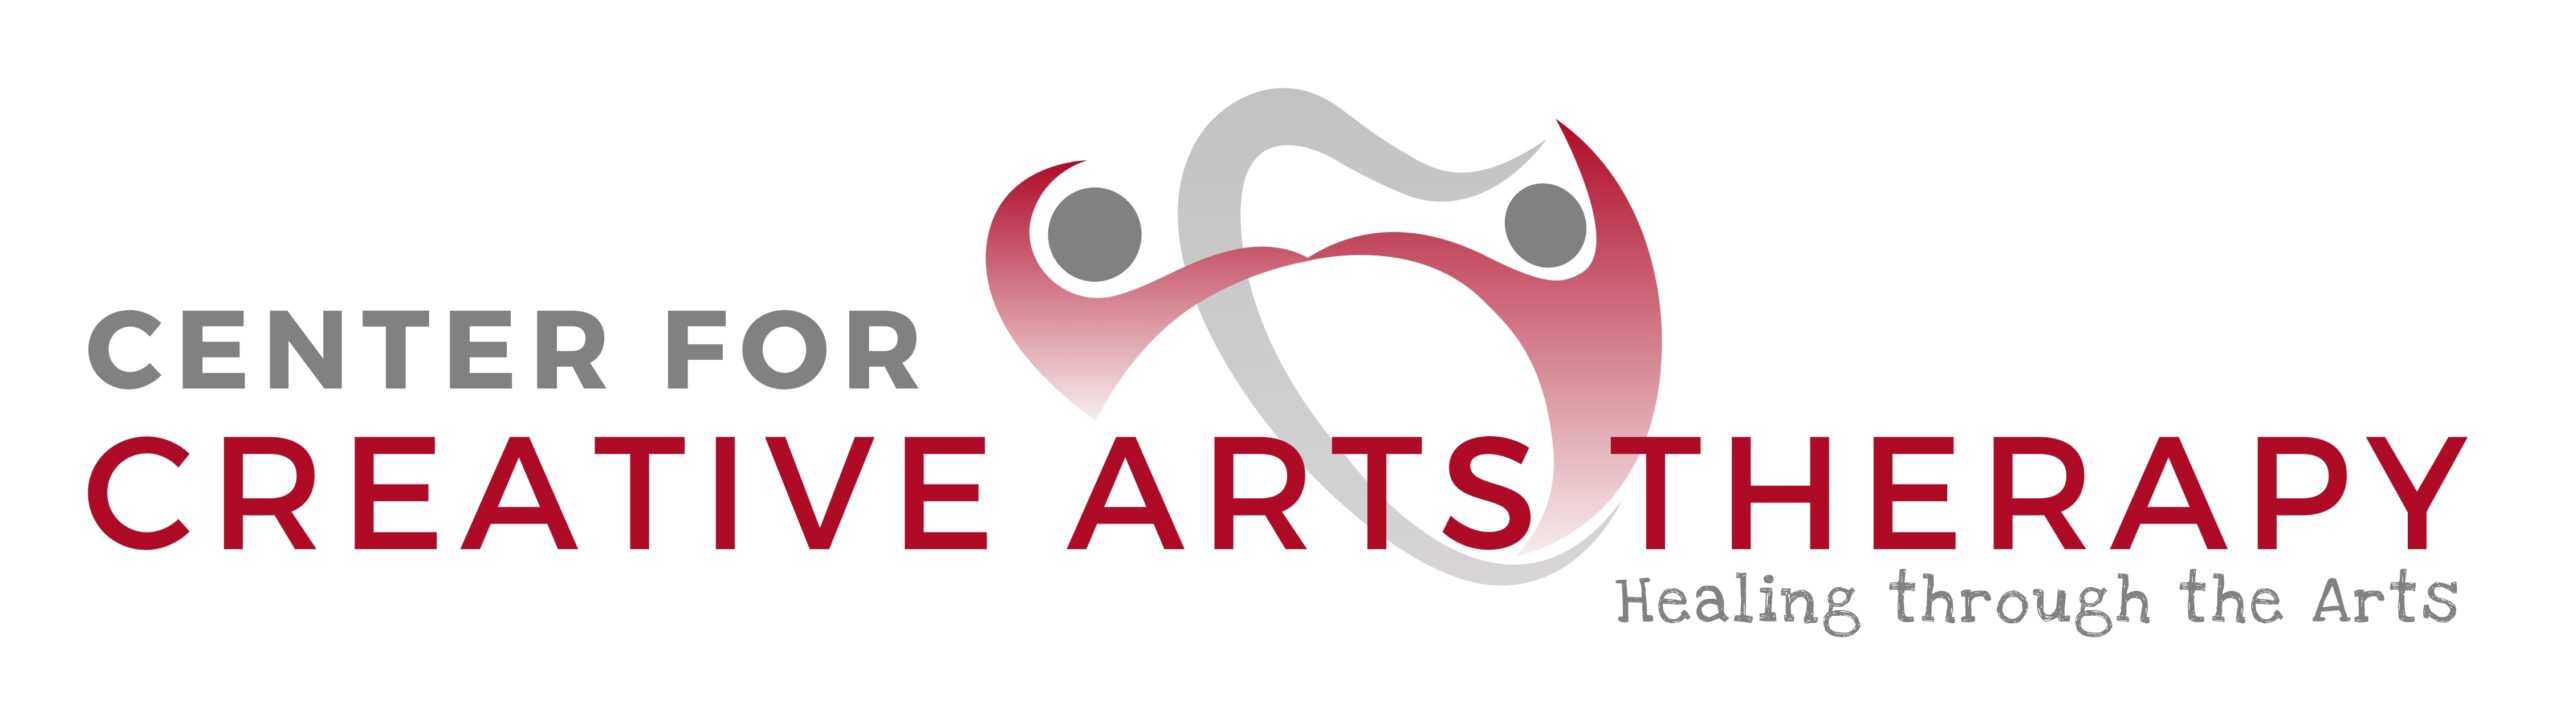 The Center for Creative Arts Therapy is Our October Grant Winner!